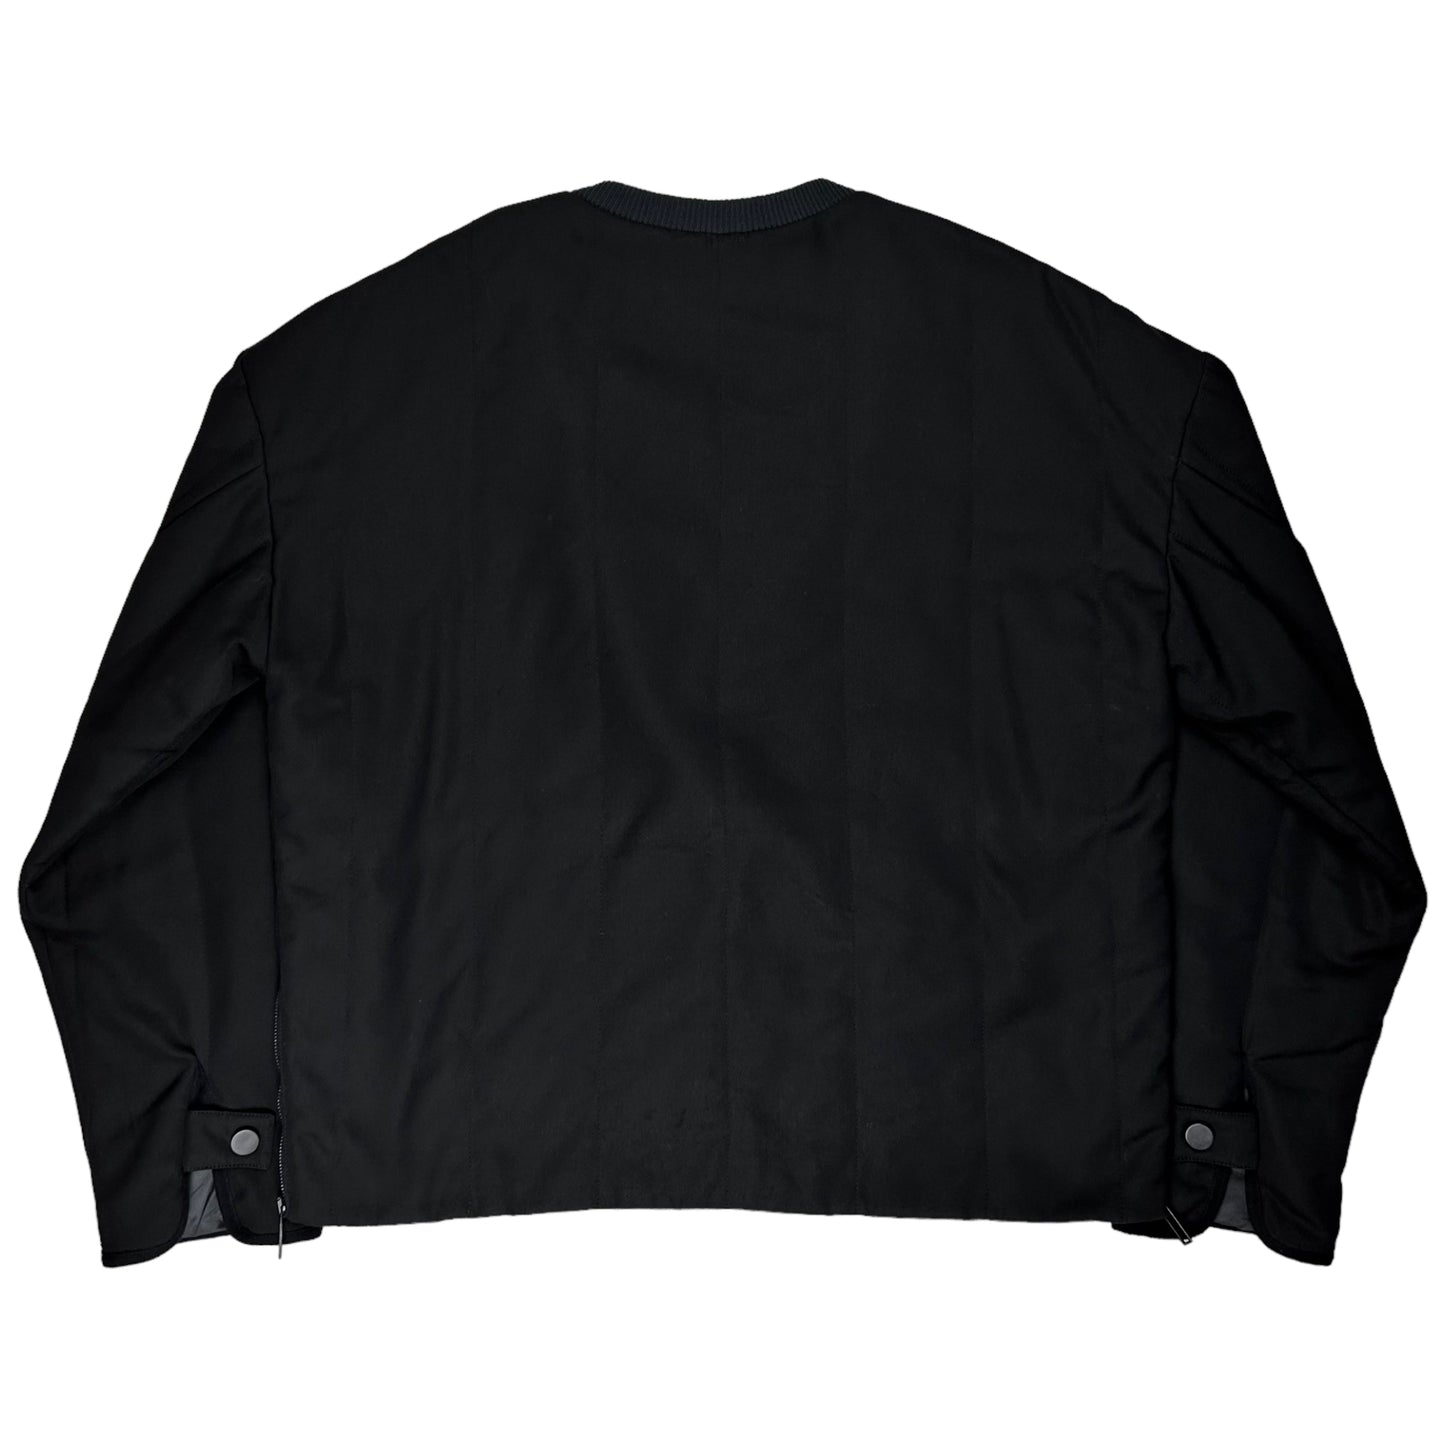 Dirk Bikkembergs Cropped Snap Button Top